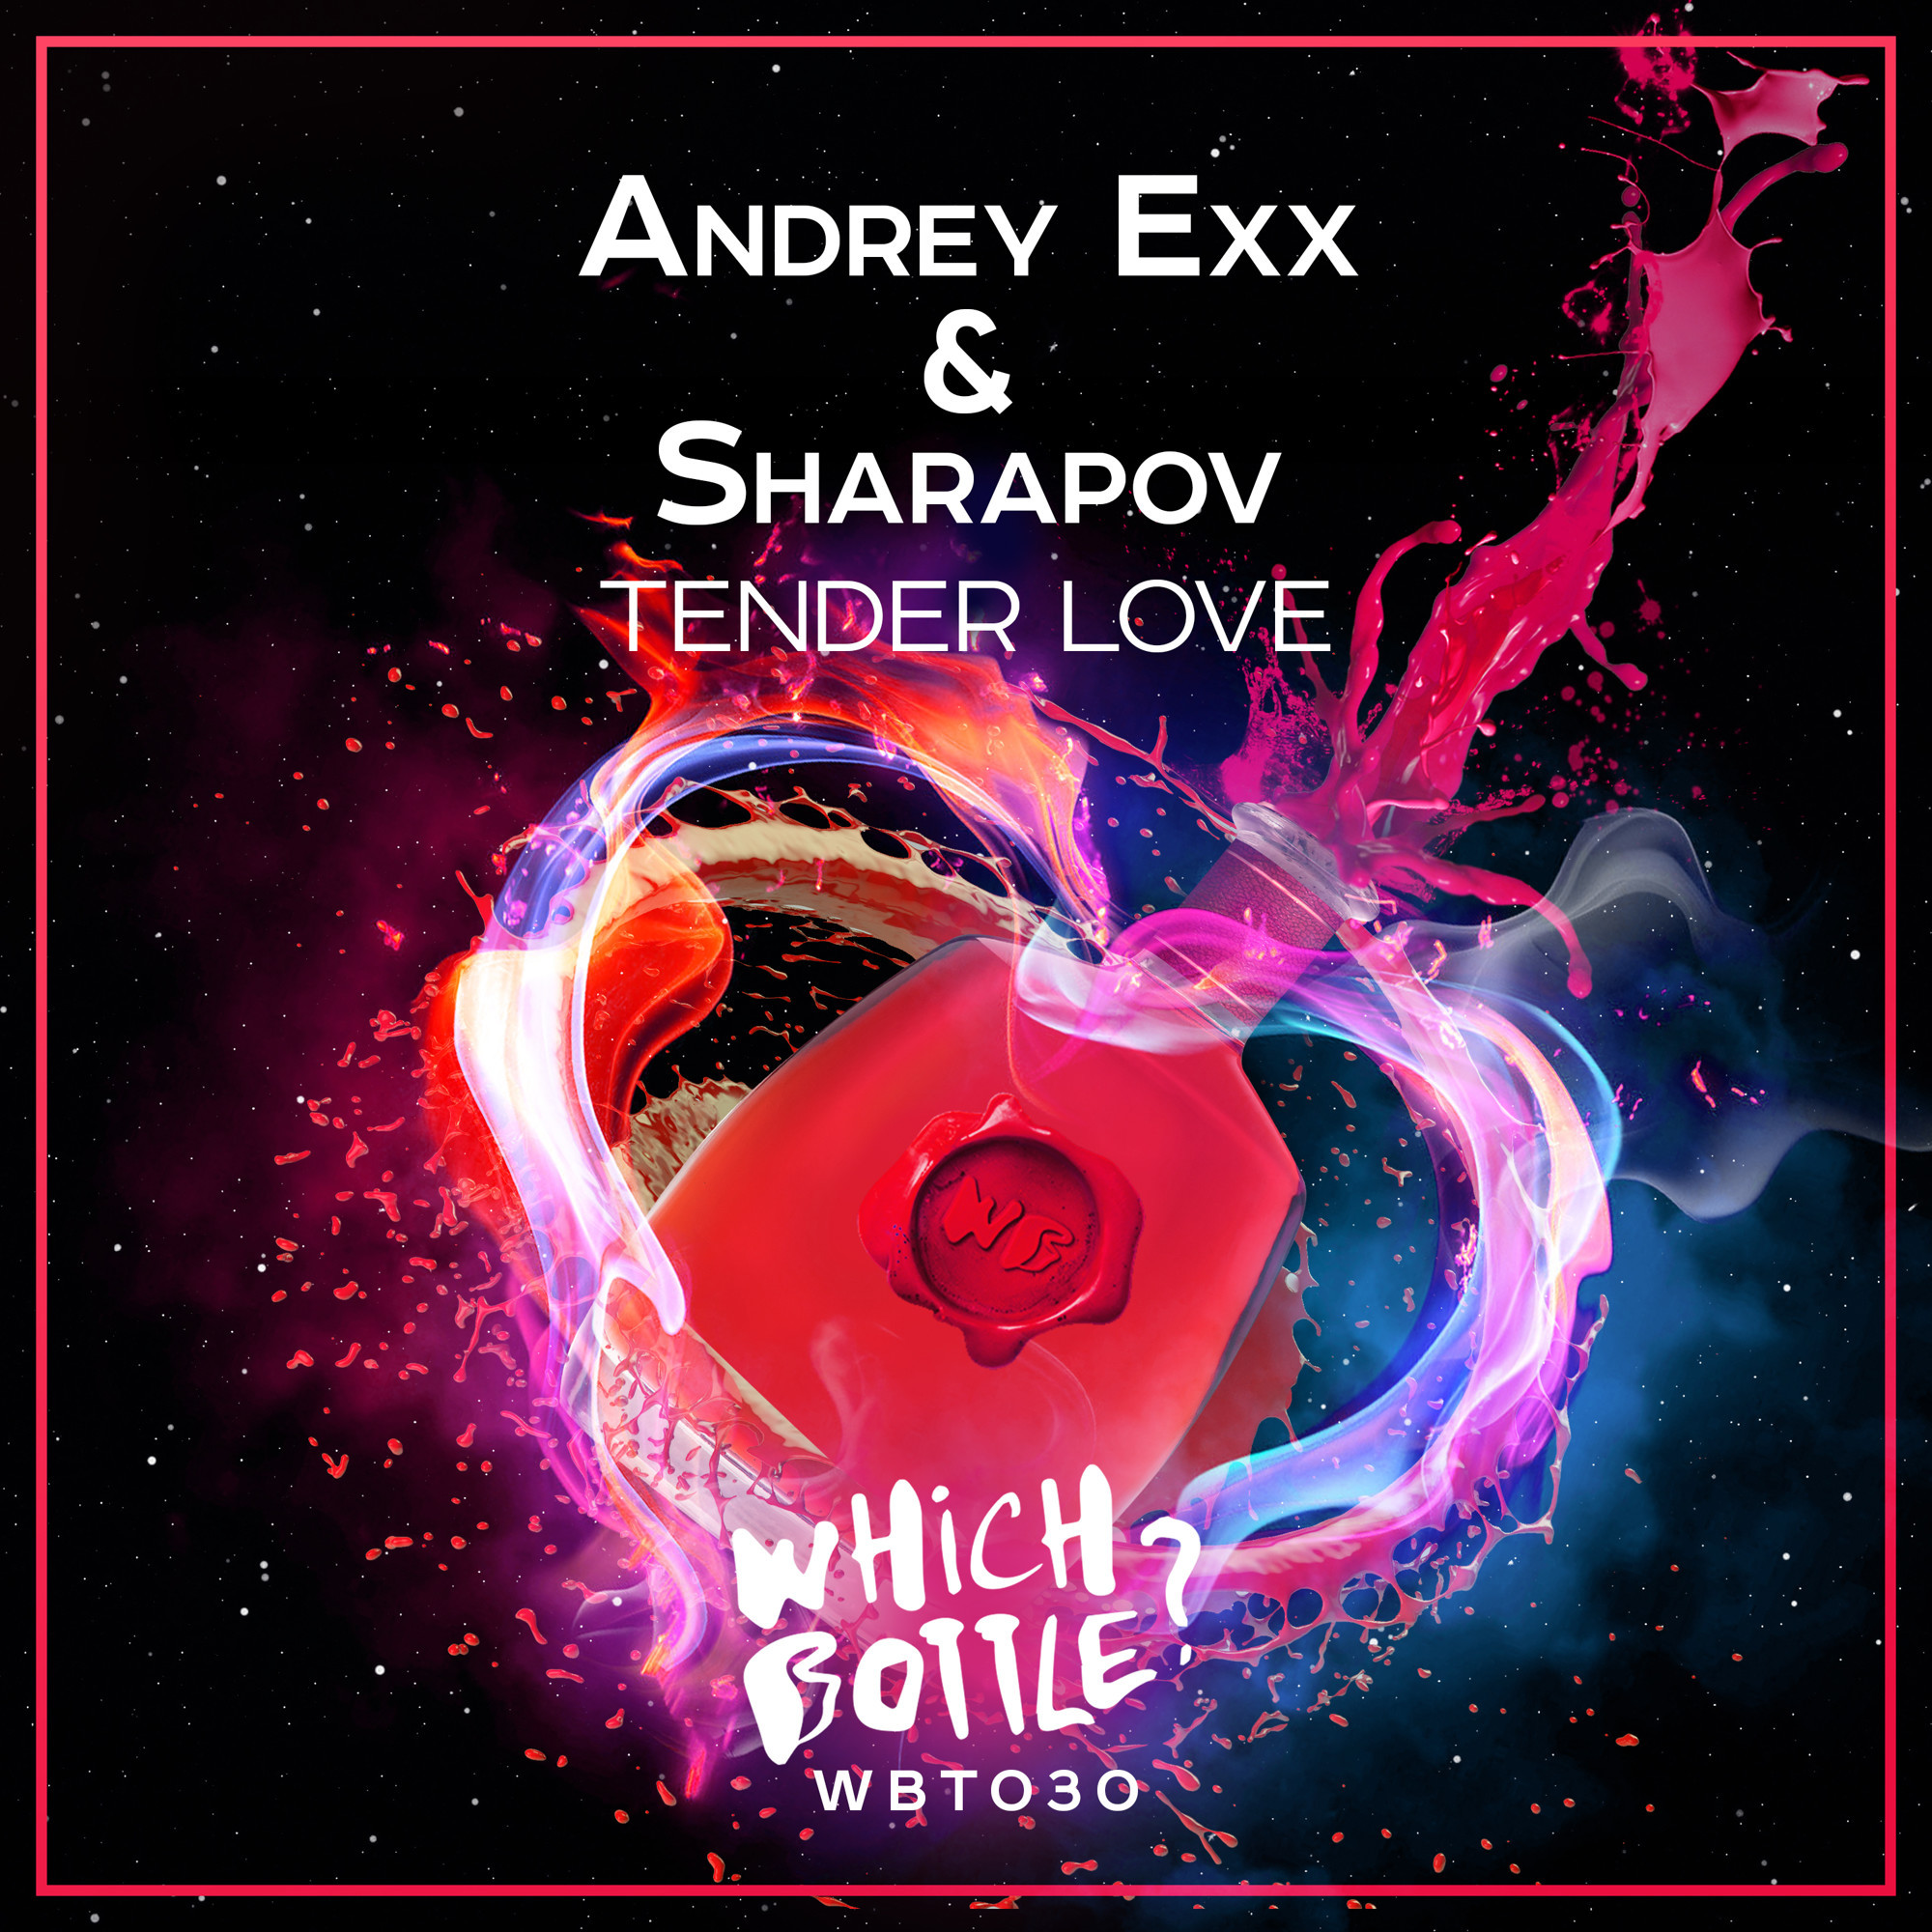 Andrey mix. Andrey Exx. Аромат Love tender. Sharapov Love you.